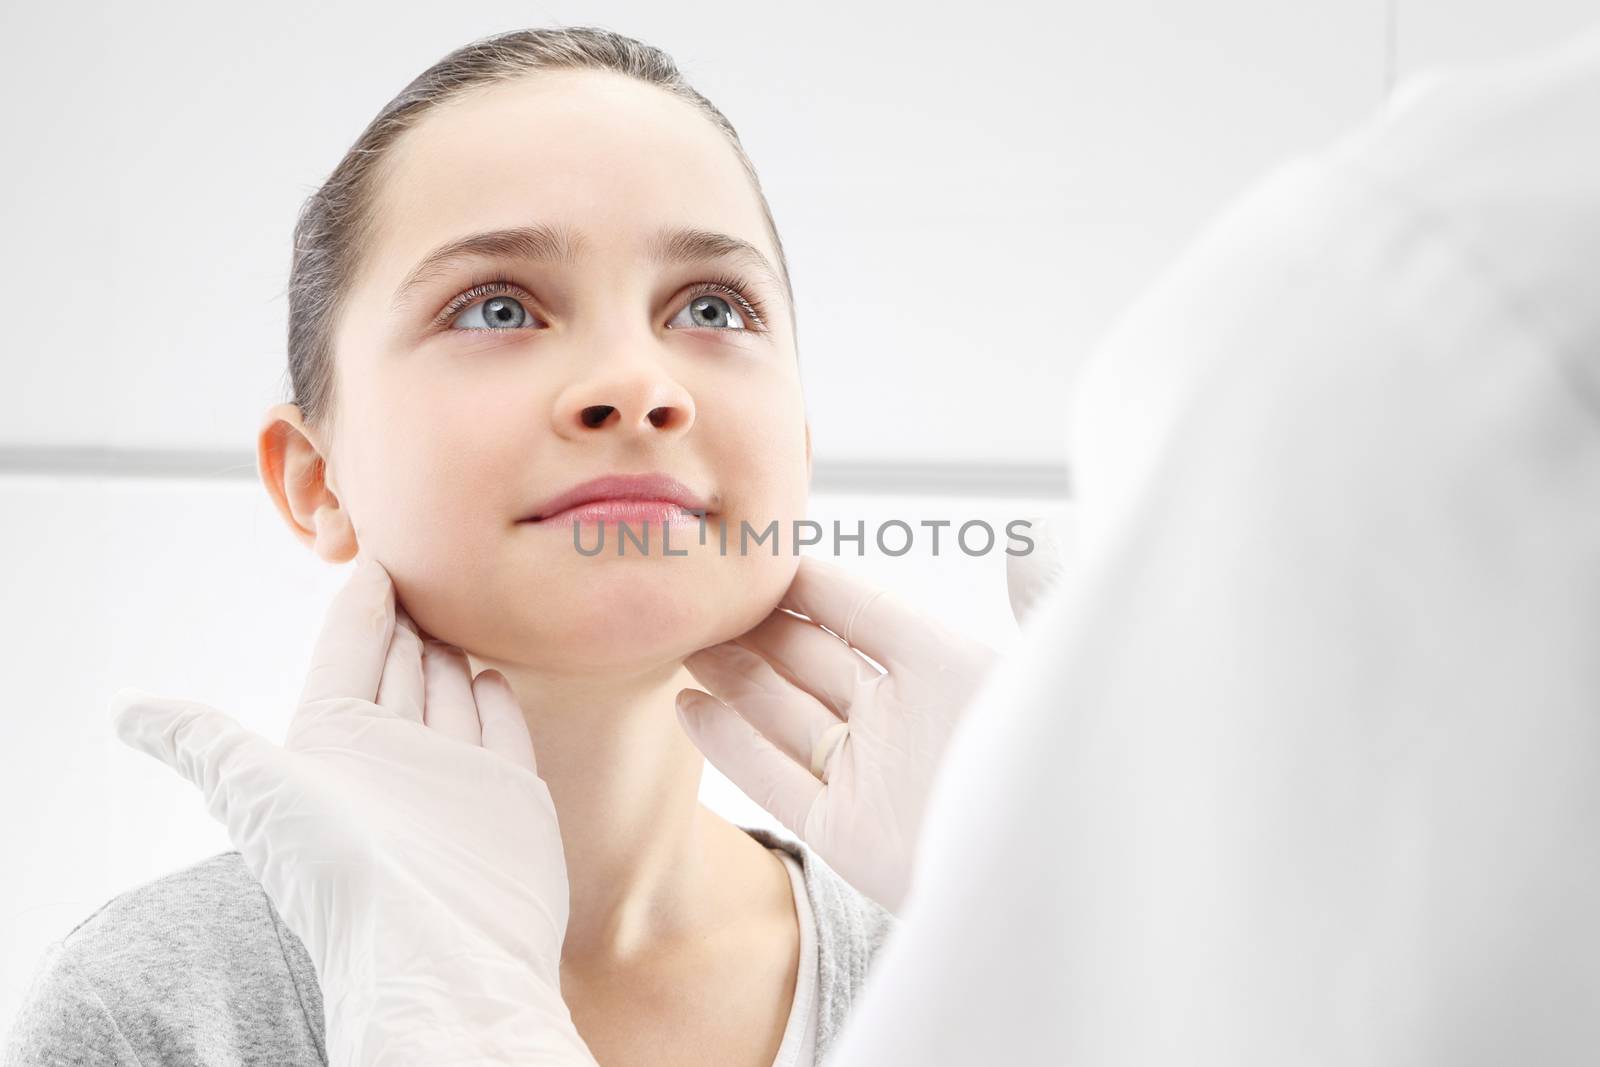 The girl in the office of a pediatrician, medical examination